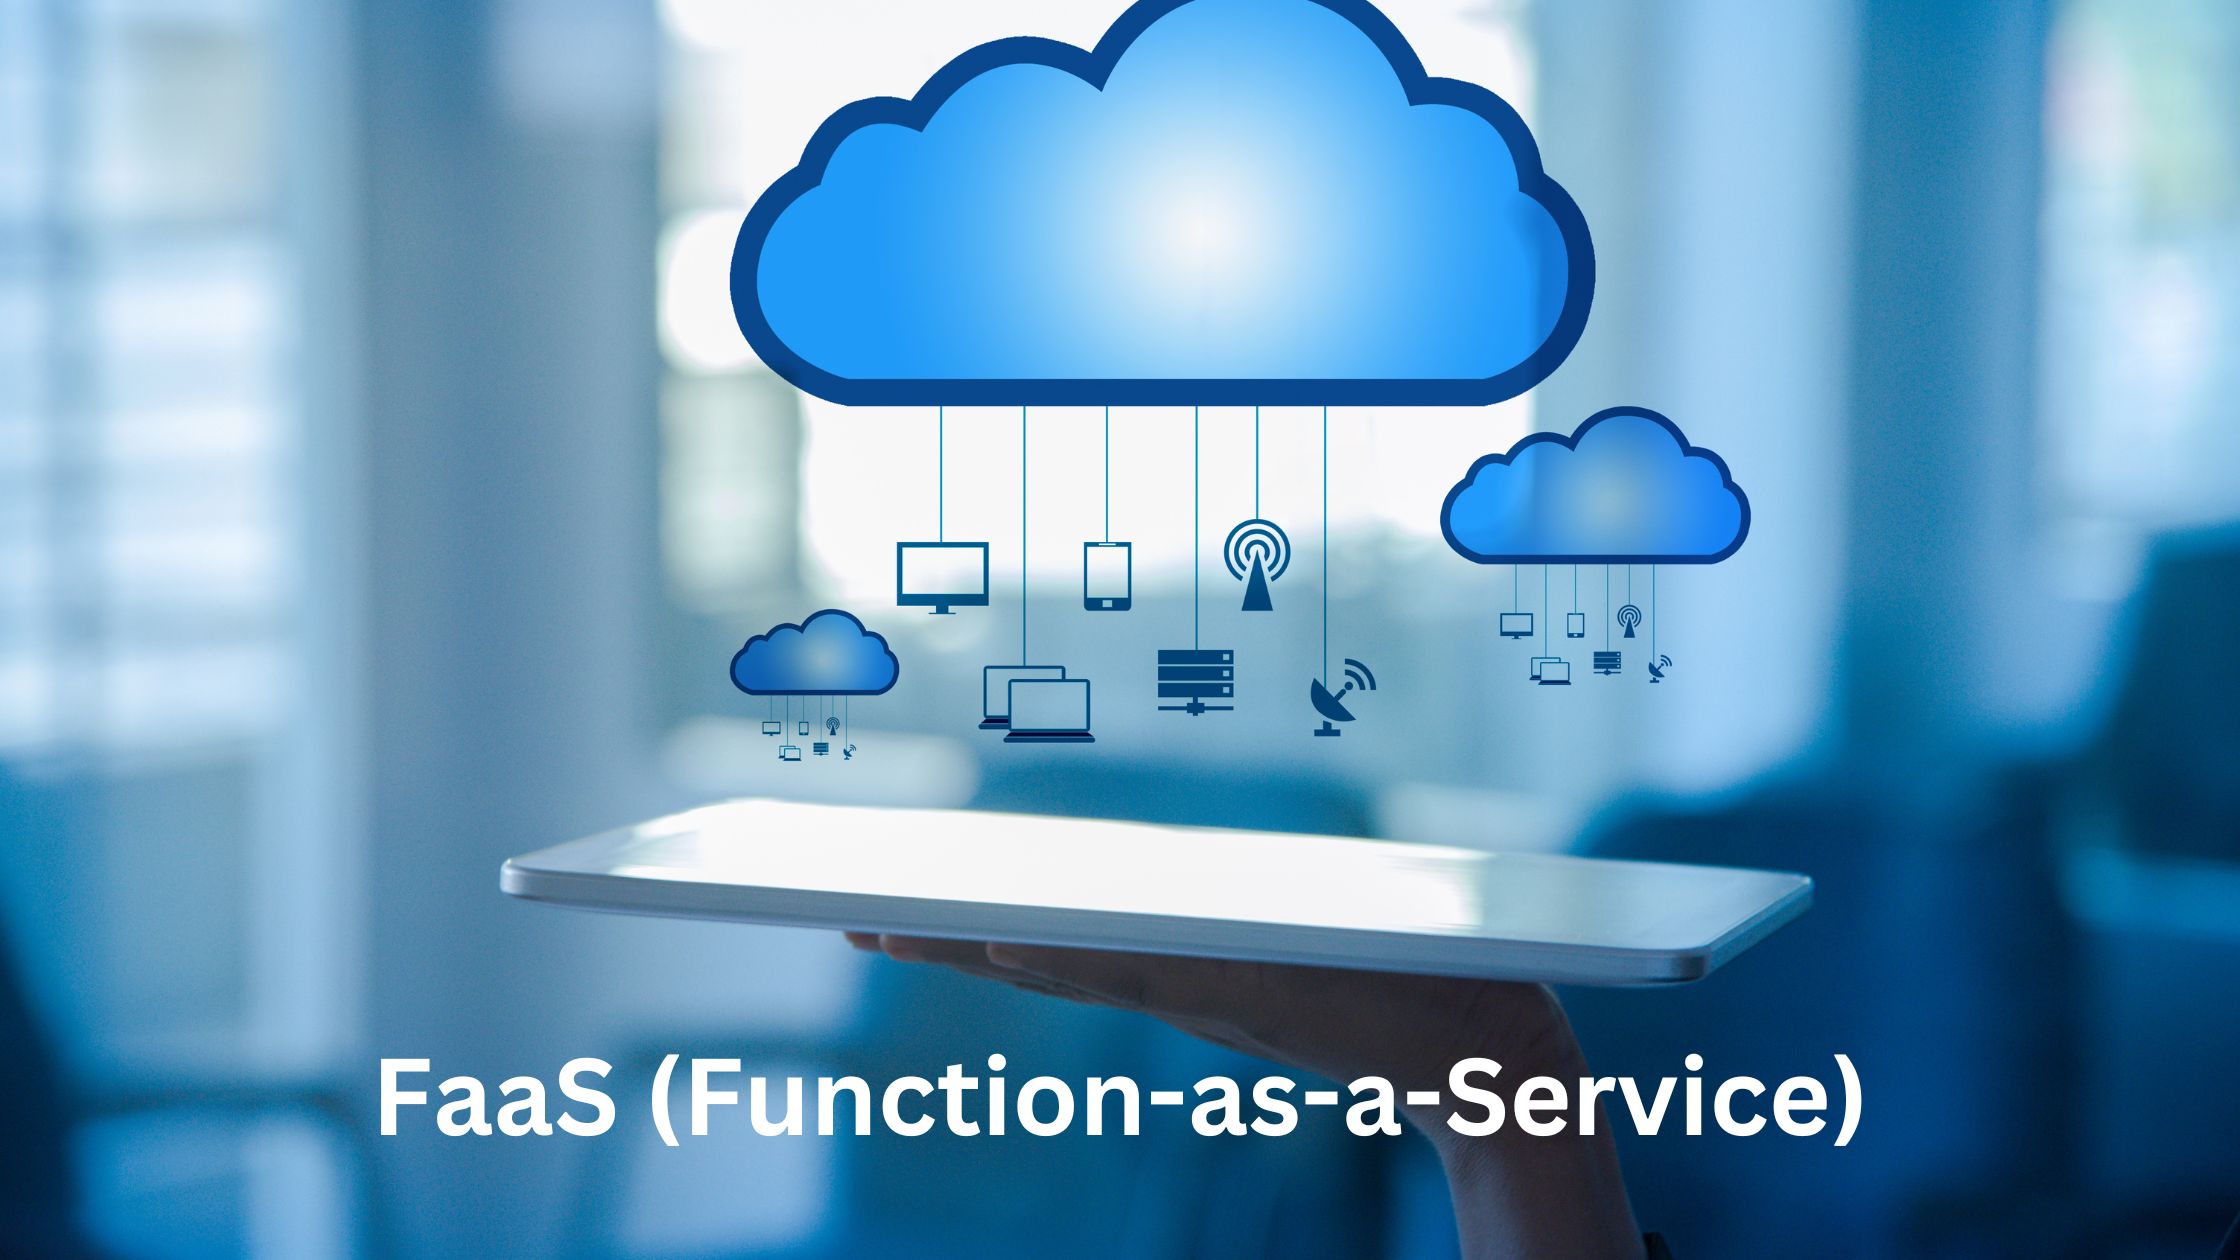 FaaS (Function-as-a-Service)